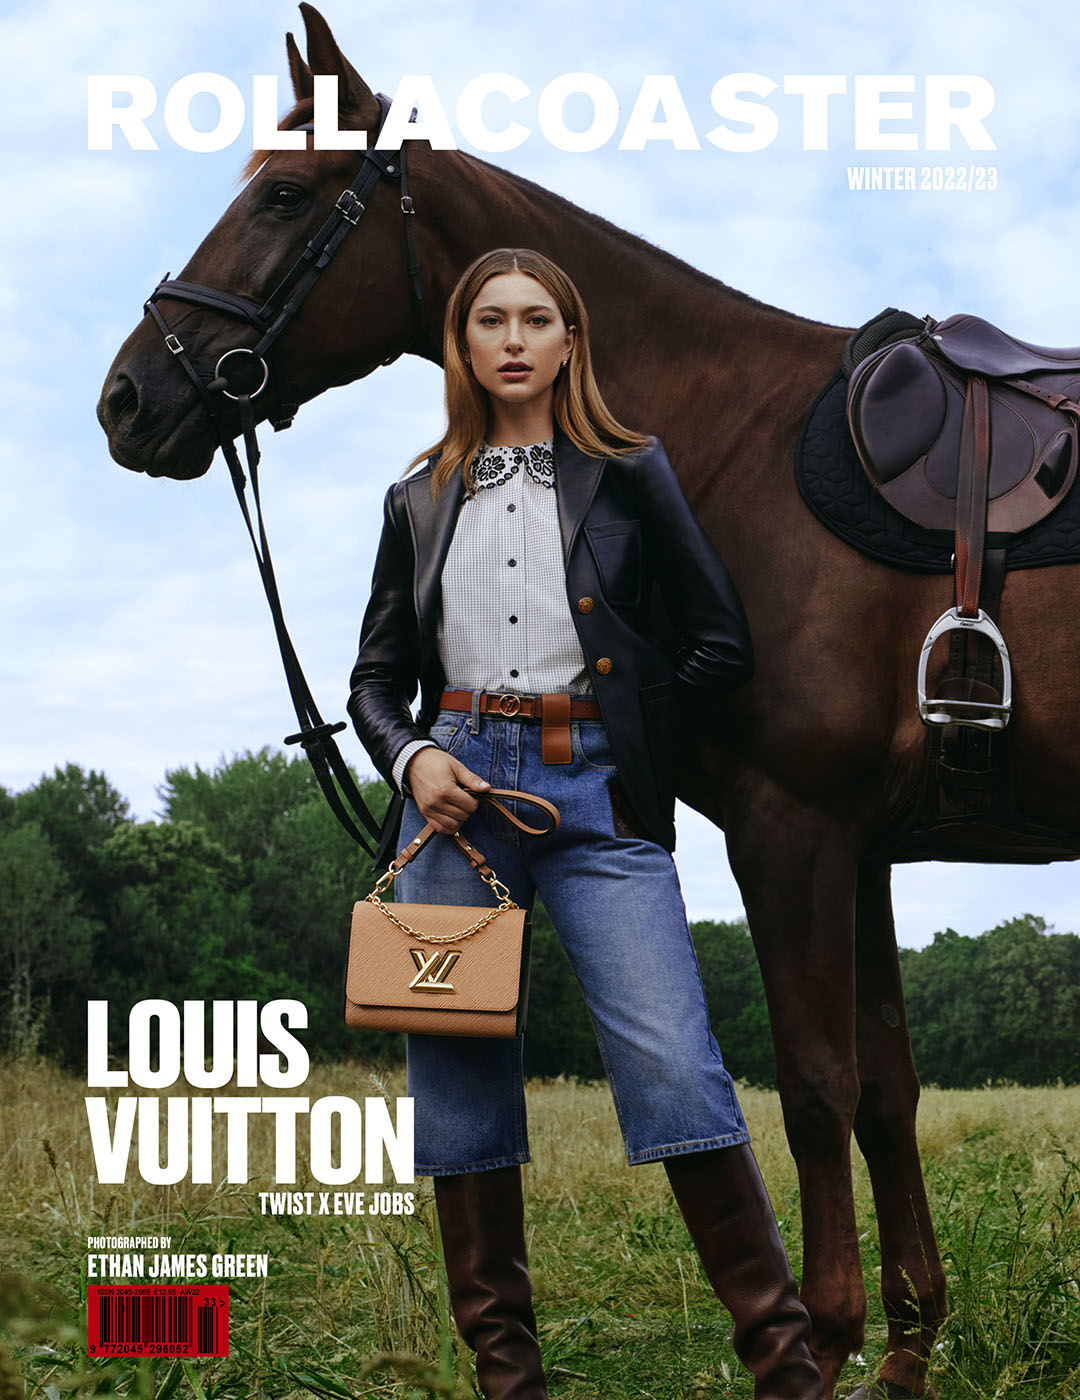 Eve Jobs in Louis Vuitton Covers Rollacoaster Magazine's Winter 2022 I 